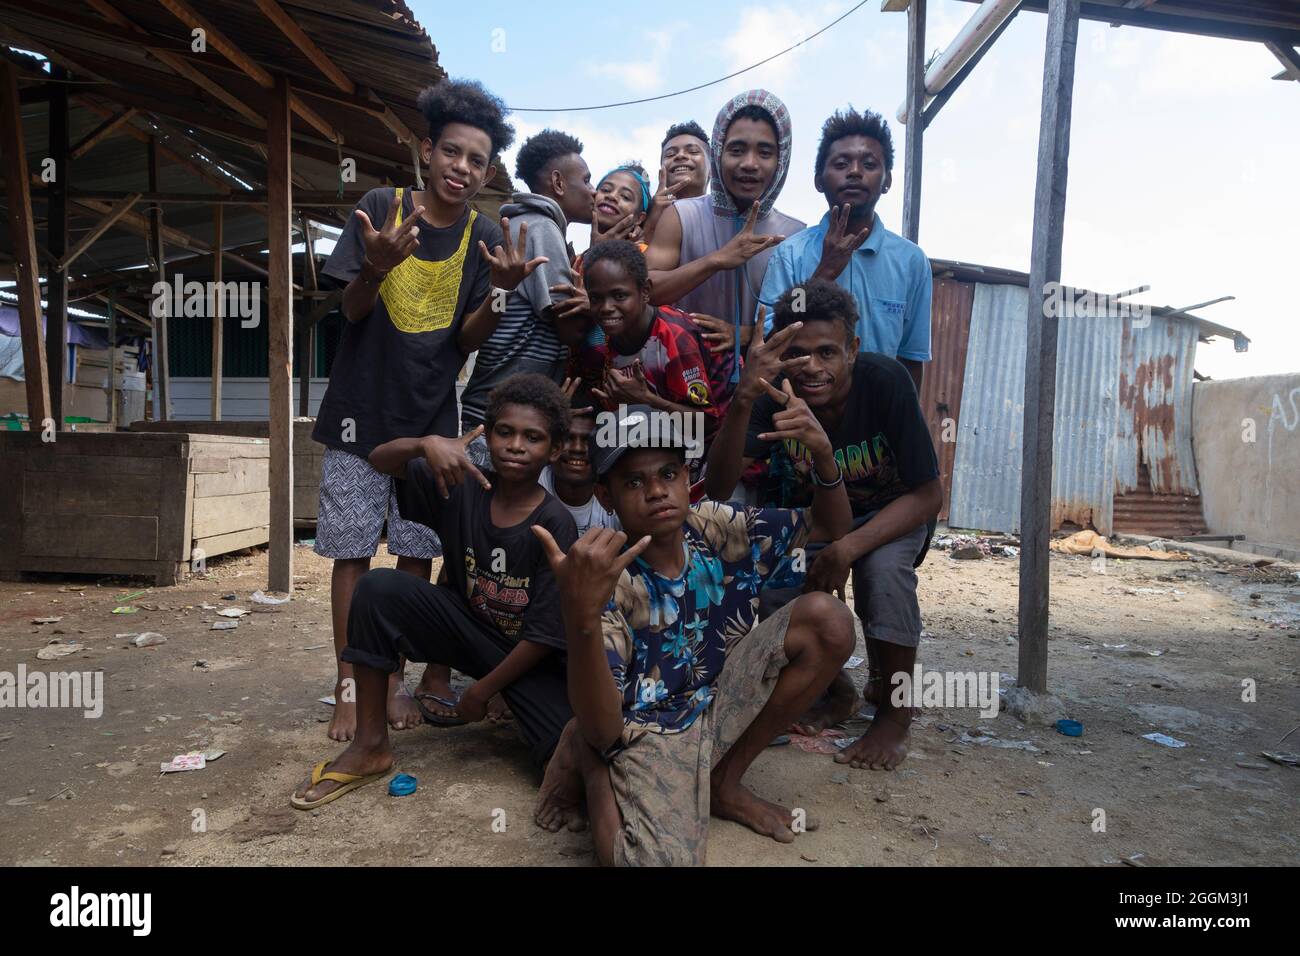 Sorong, Indonesia - Oct 3, 2019: A group of lively young lads goof around and make weird faces in a neighborhood of Sorong, West Papua Stock Photo